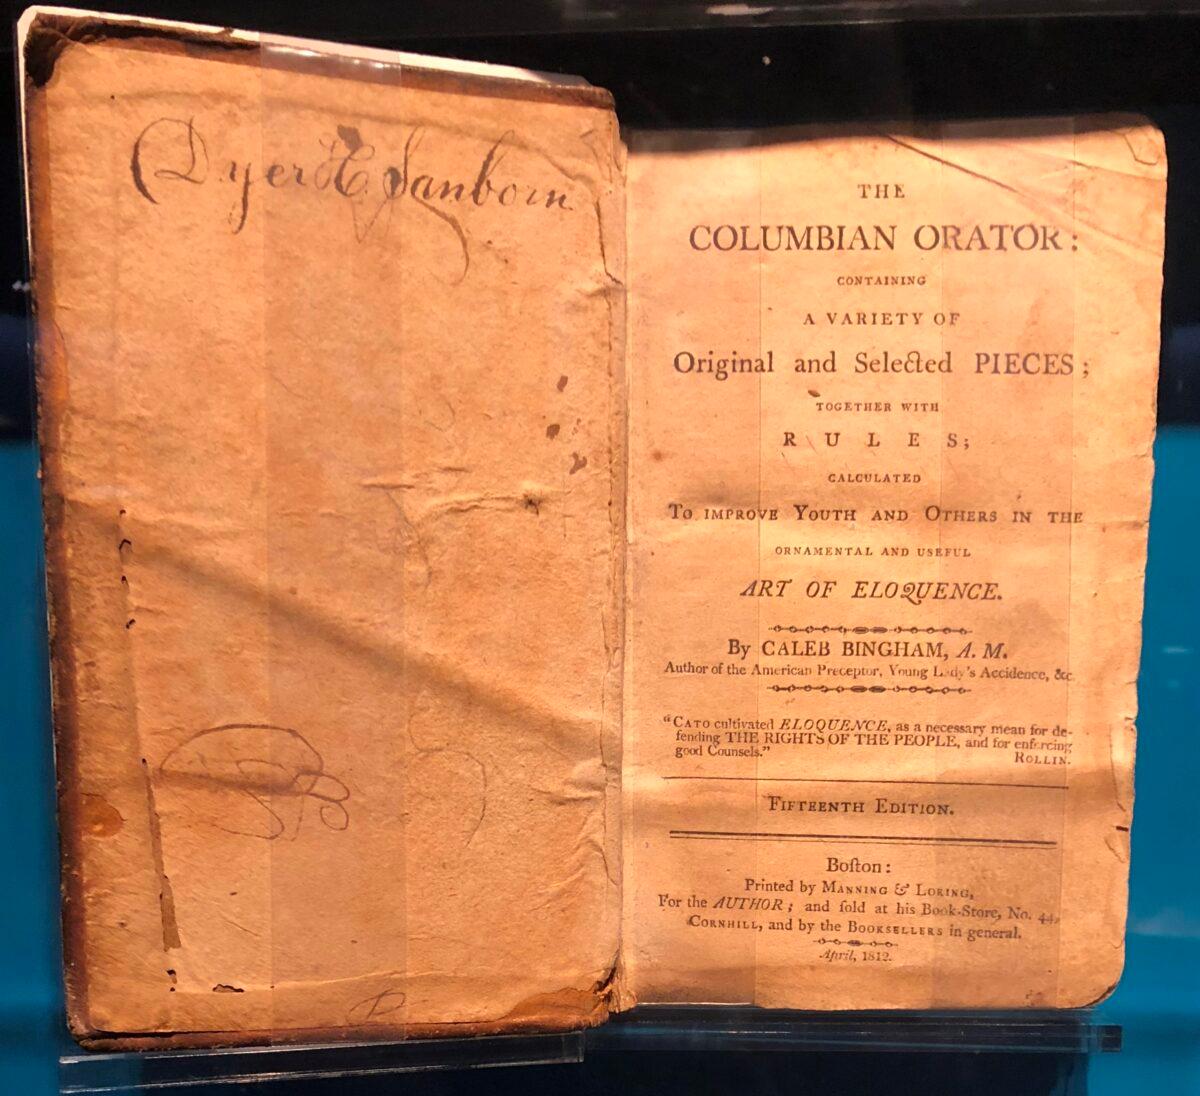 Frederick Douglass’s copy of the 1812 edition of “The Columbian Orator,” compiled by Caleb Bingham. (CC BY-SA 4.0)